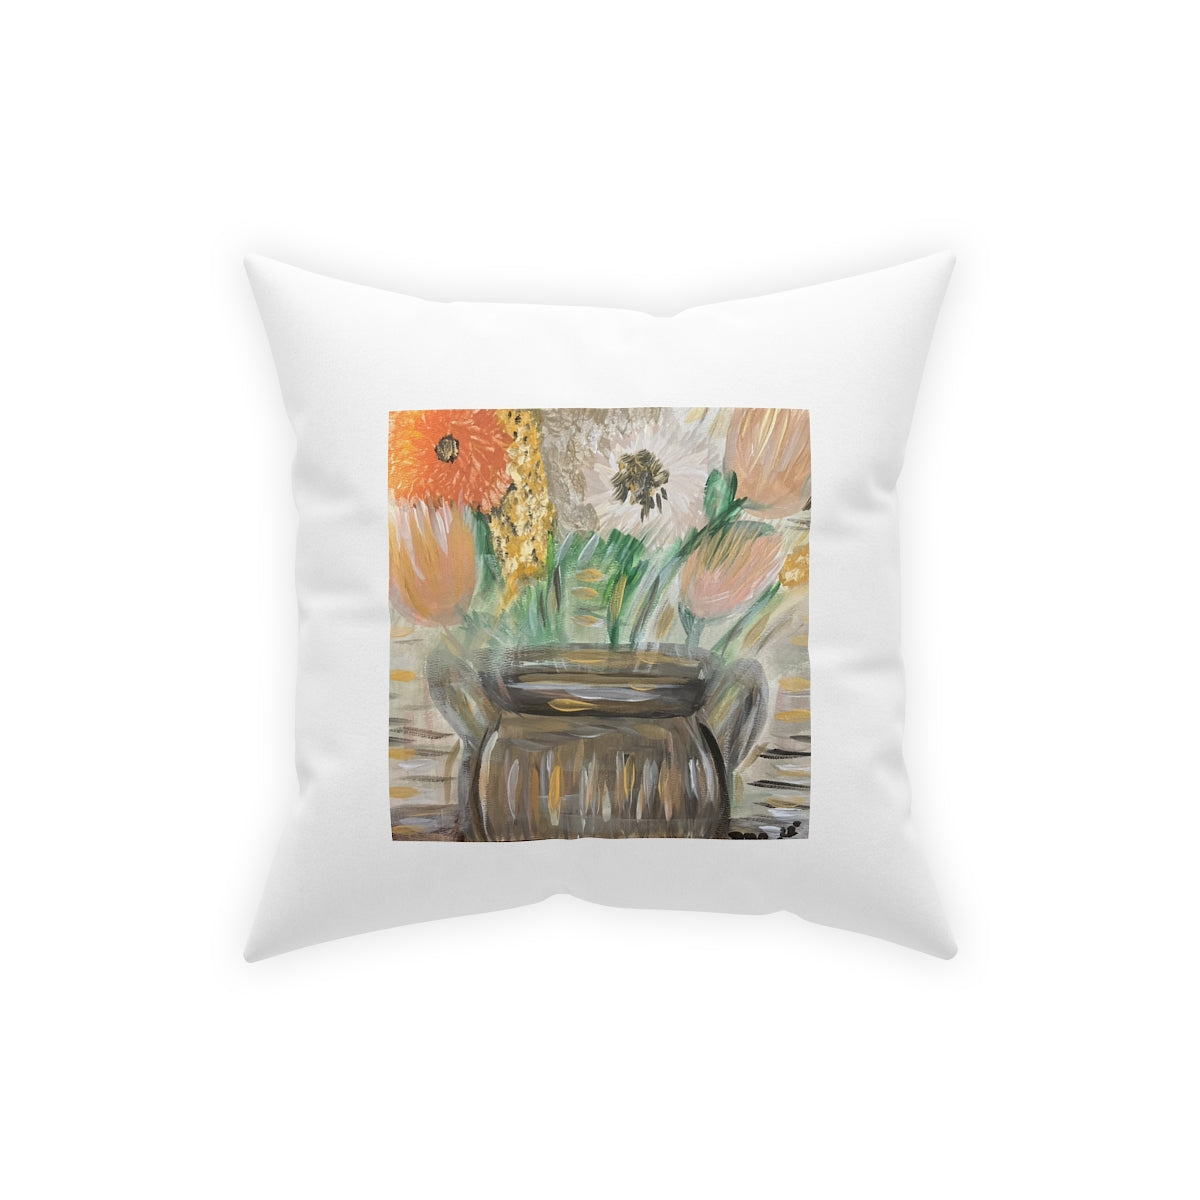 The Greg - white Pillows Broadcloth Pillow